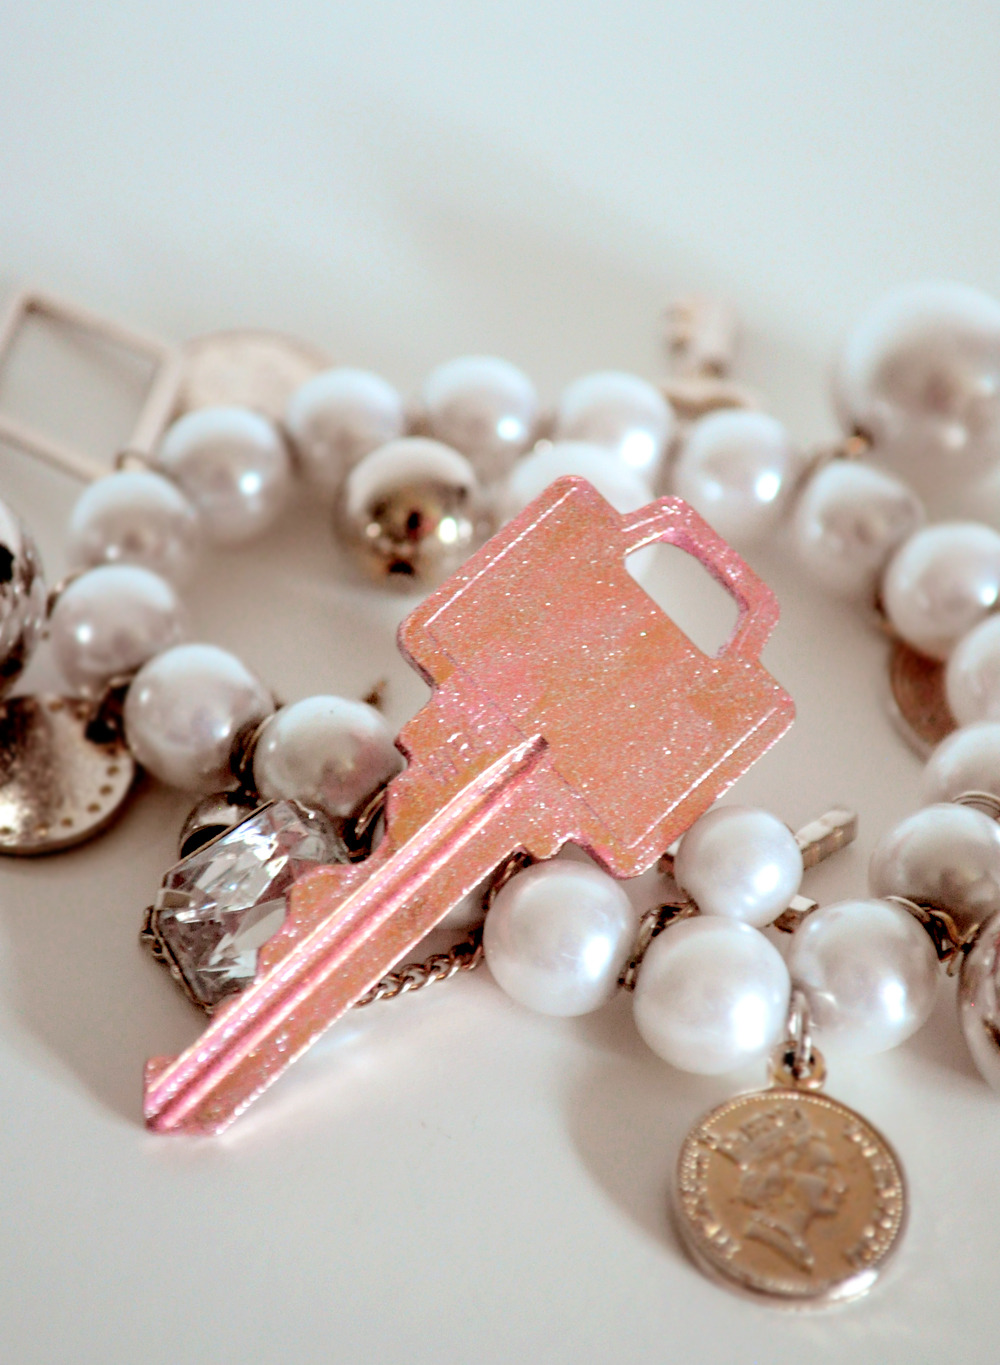 Add a thin layer of glitter nail polish to your keys for sparkle~